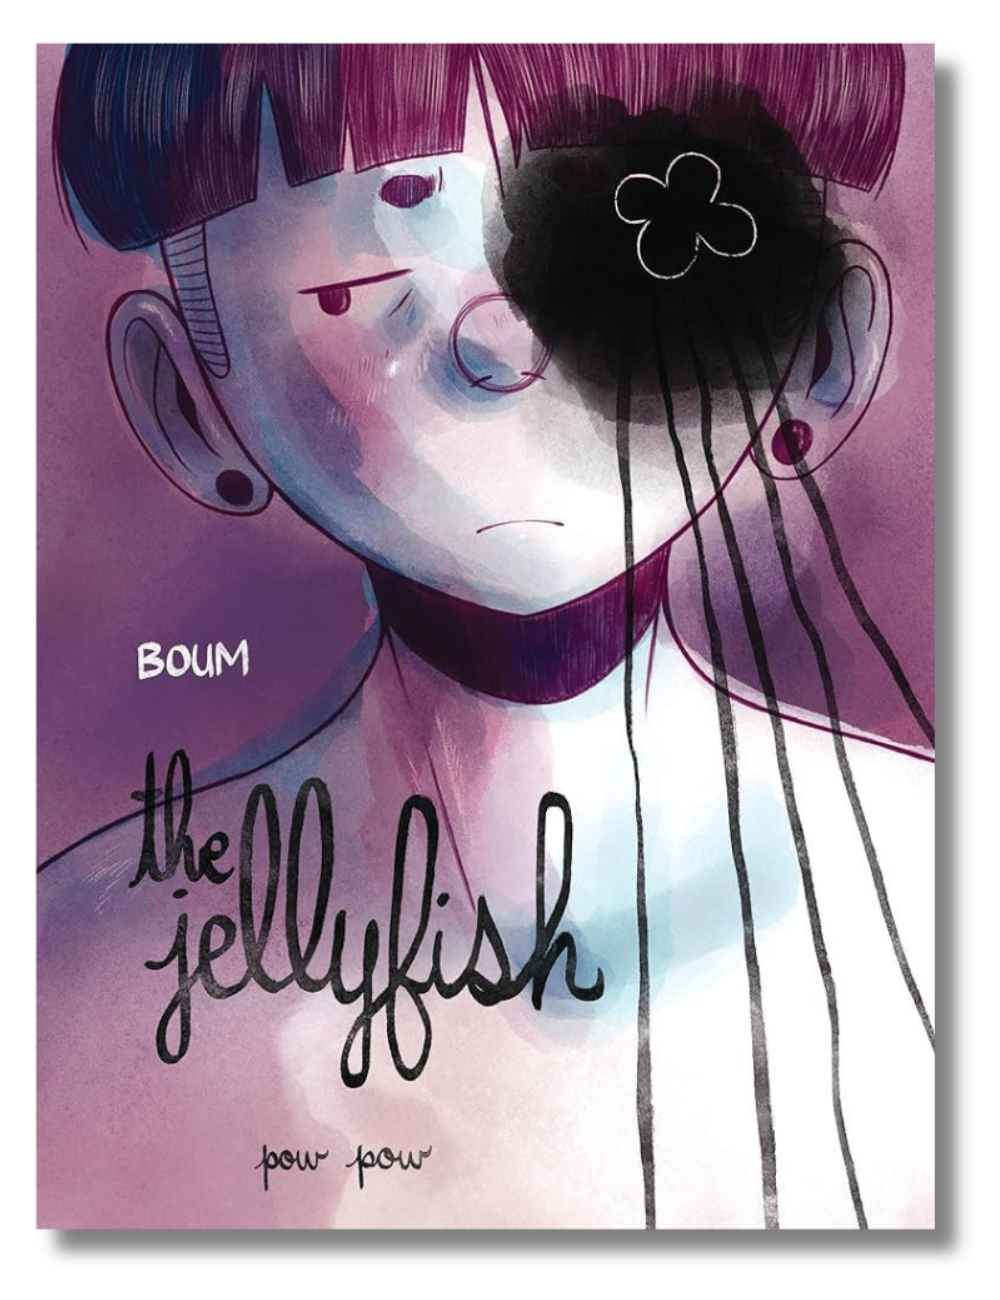 The cover of "The Jellyfish" by Boum, translated by Robin Lang and Helge Dascher